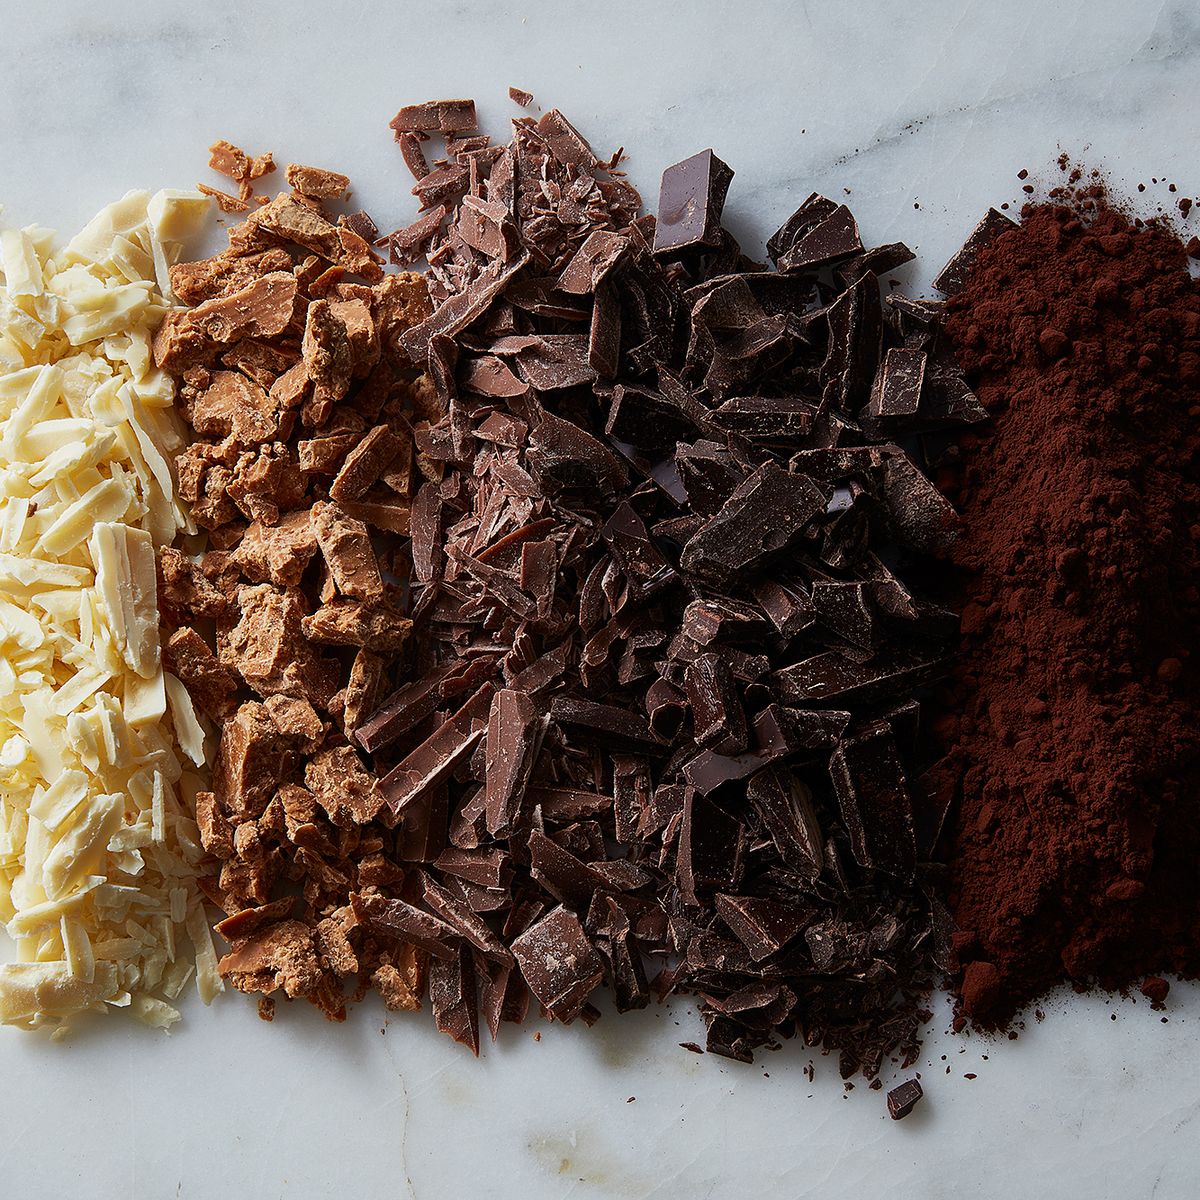 Chocolate Making Tips - Choose the perfect chocolate for your